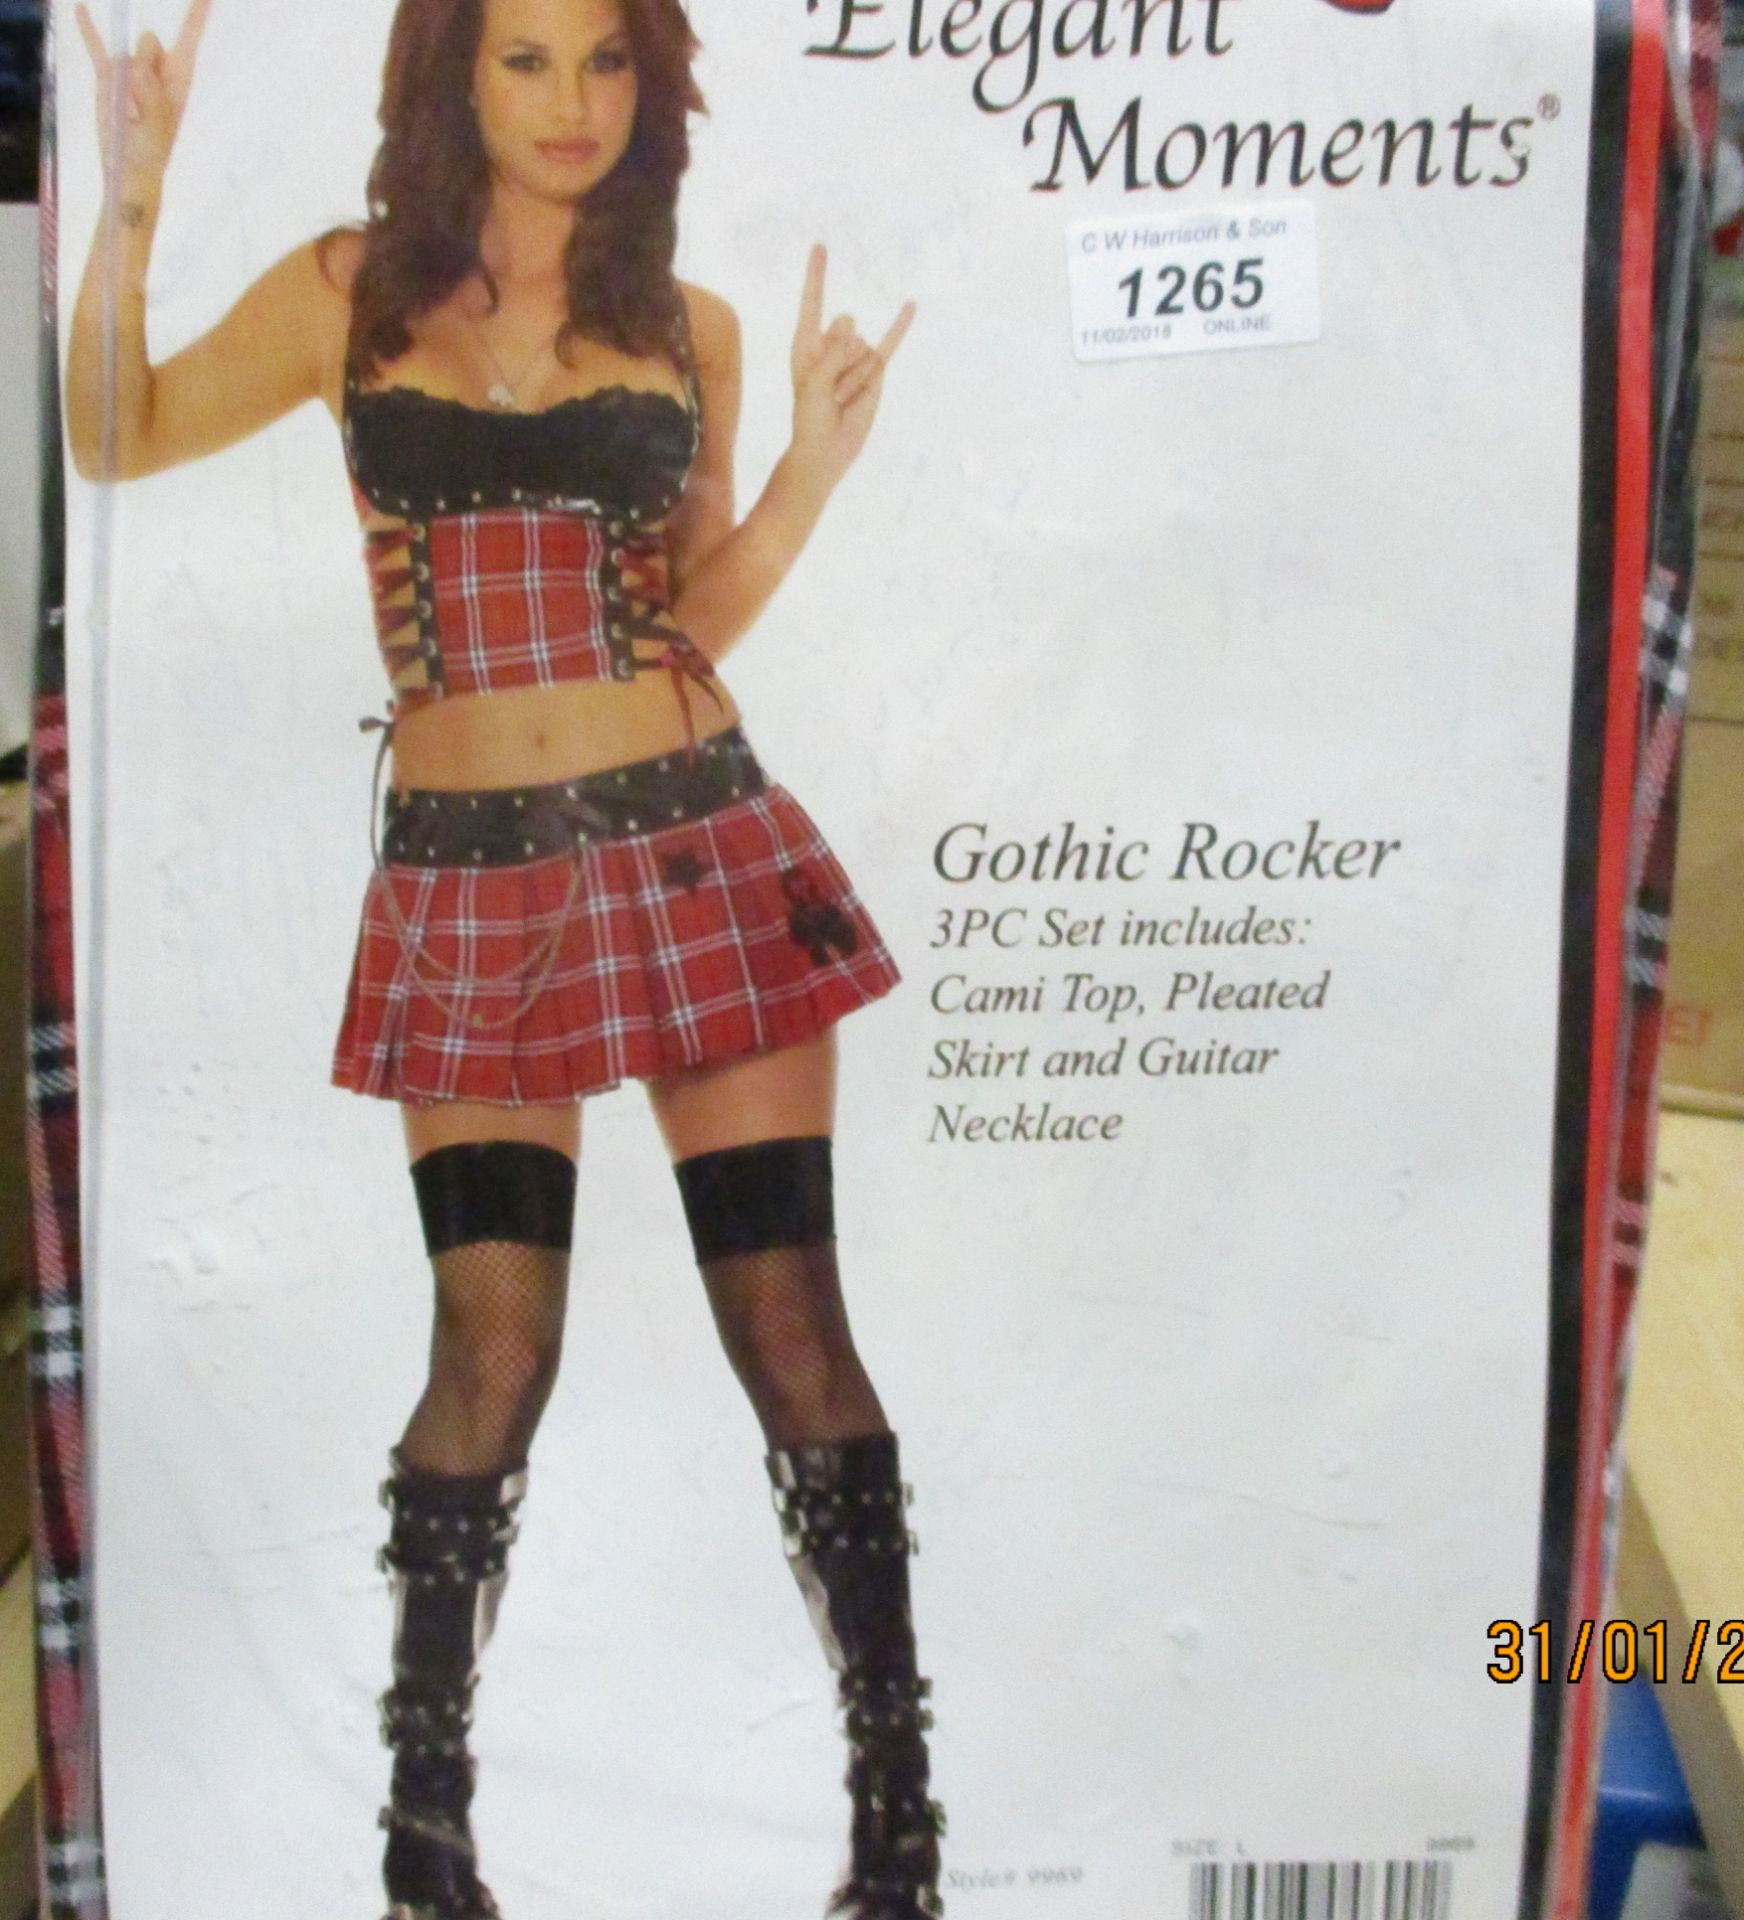 16 x Elegant Moments Gothic Rocker fancy dress costumes (all size L) - box not included